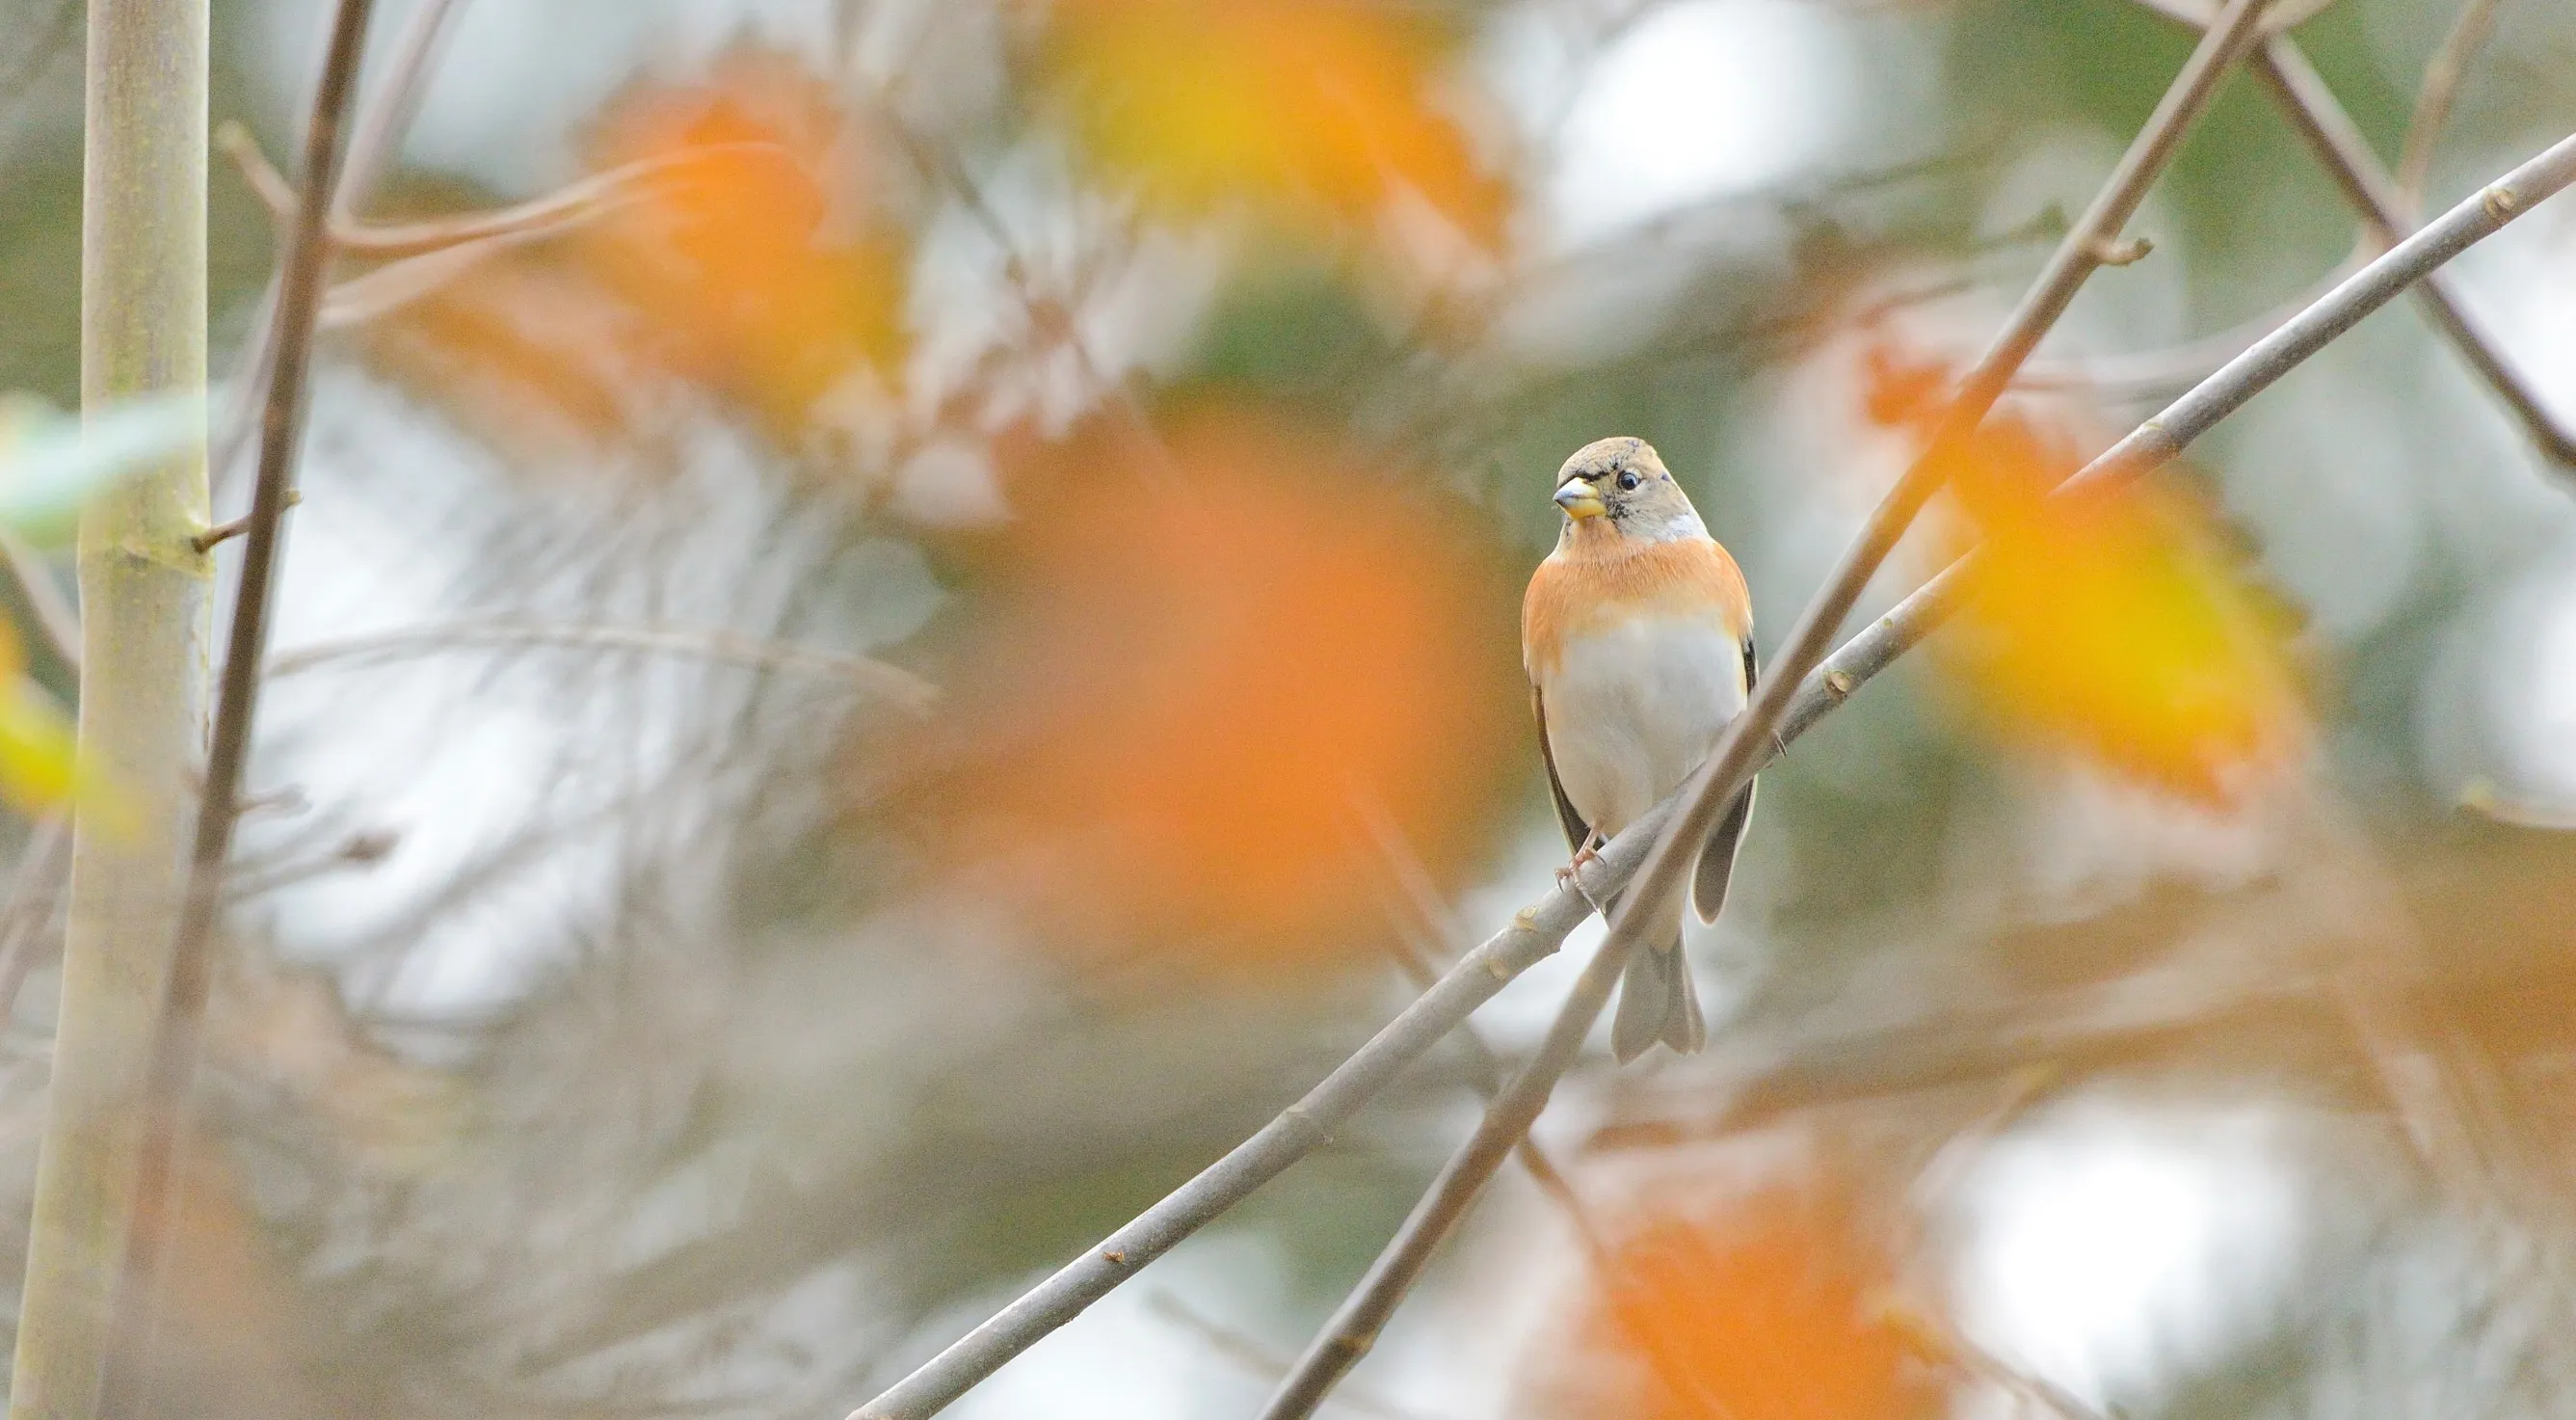 Female Brambling perched in an autumnal tree